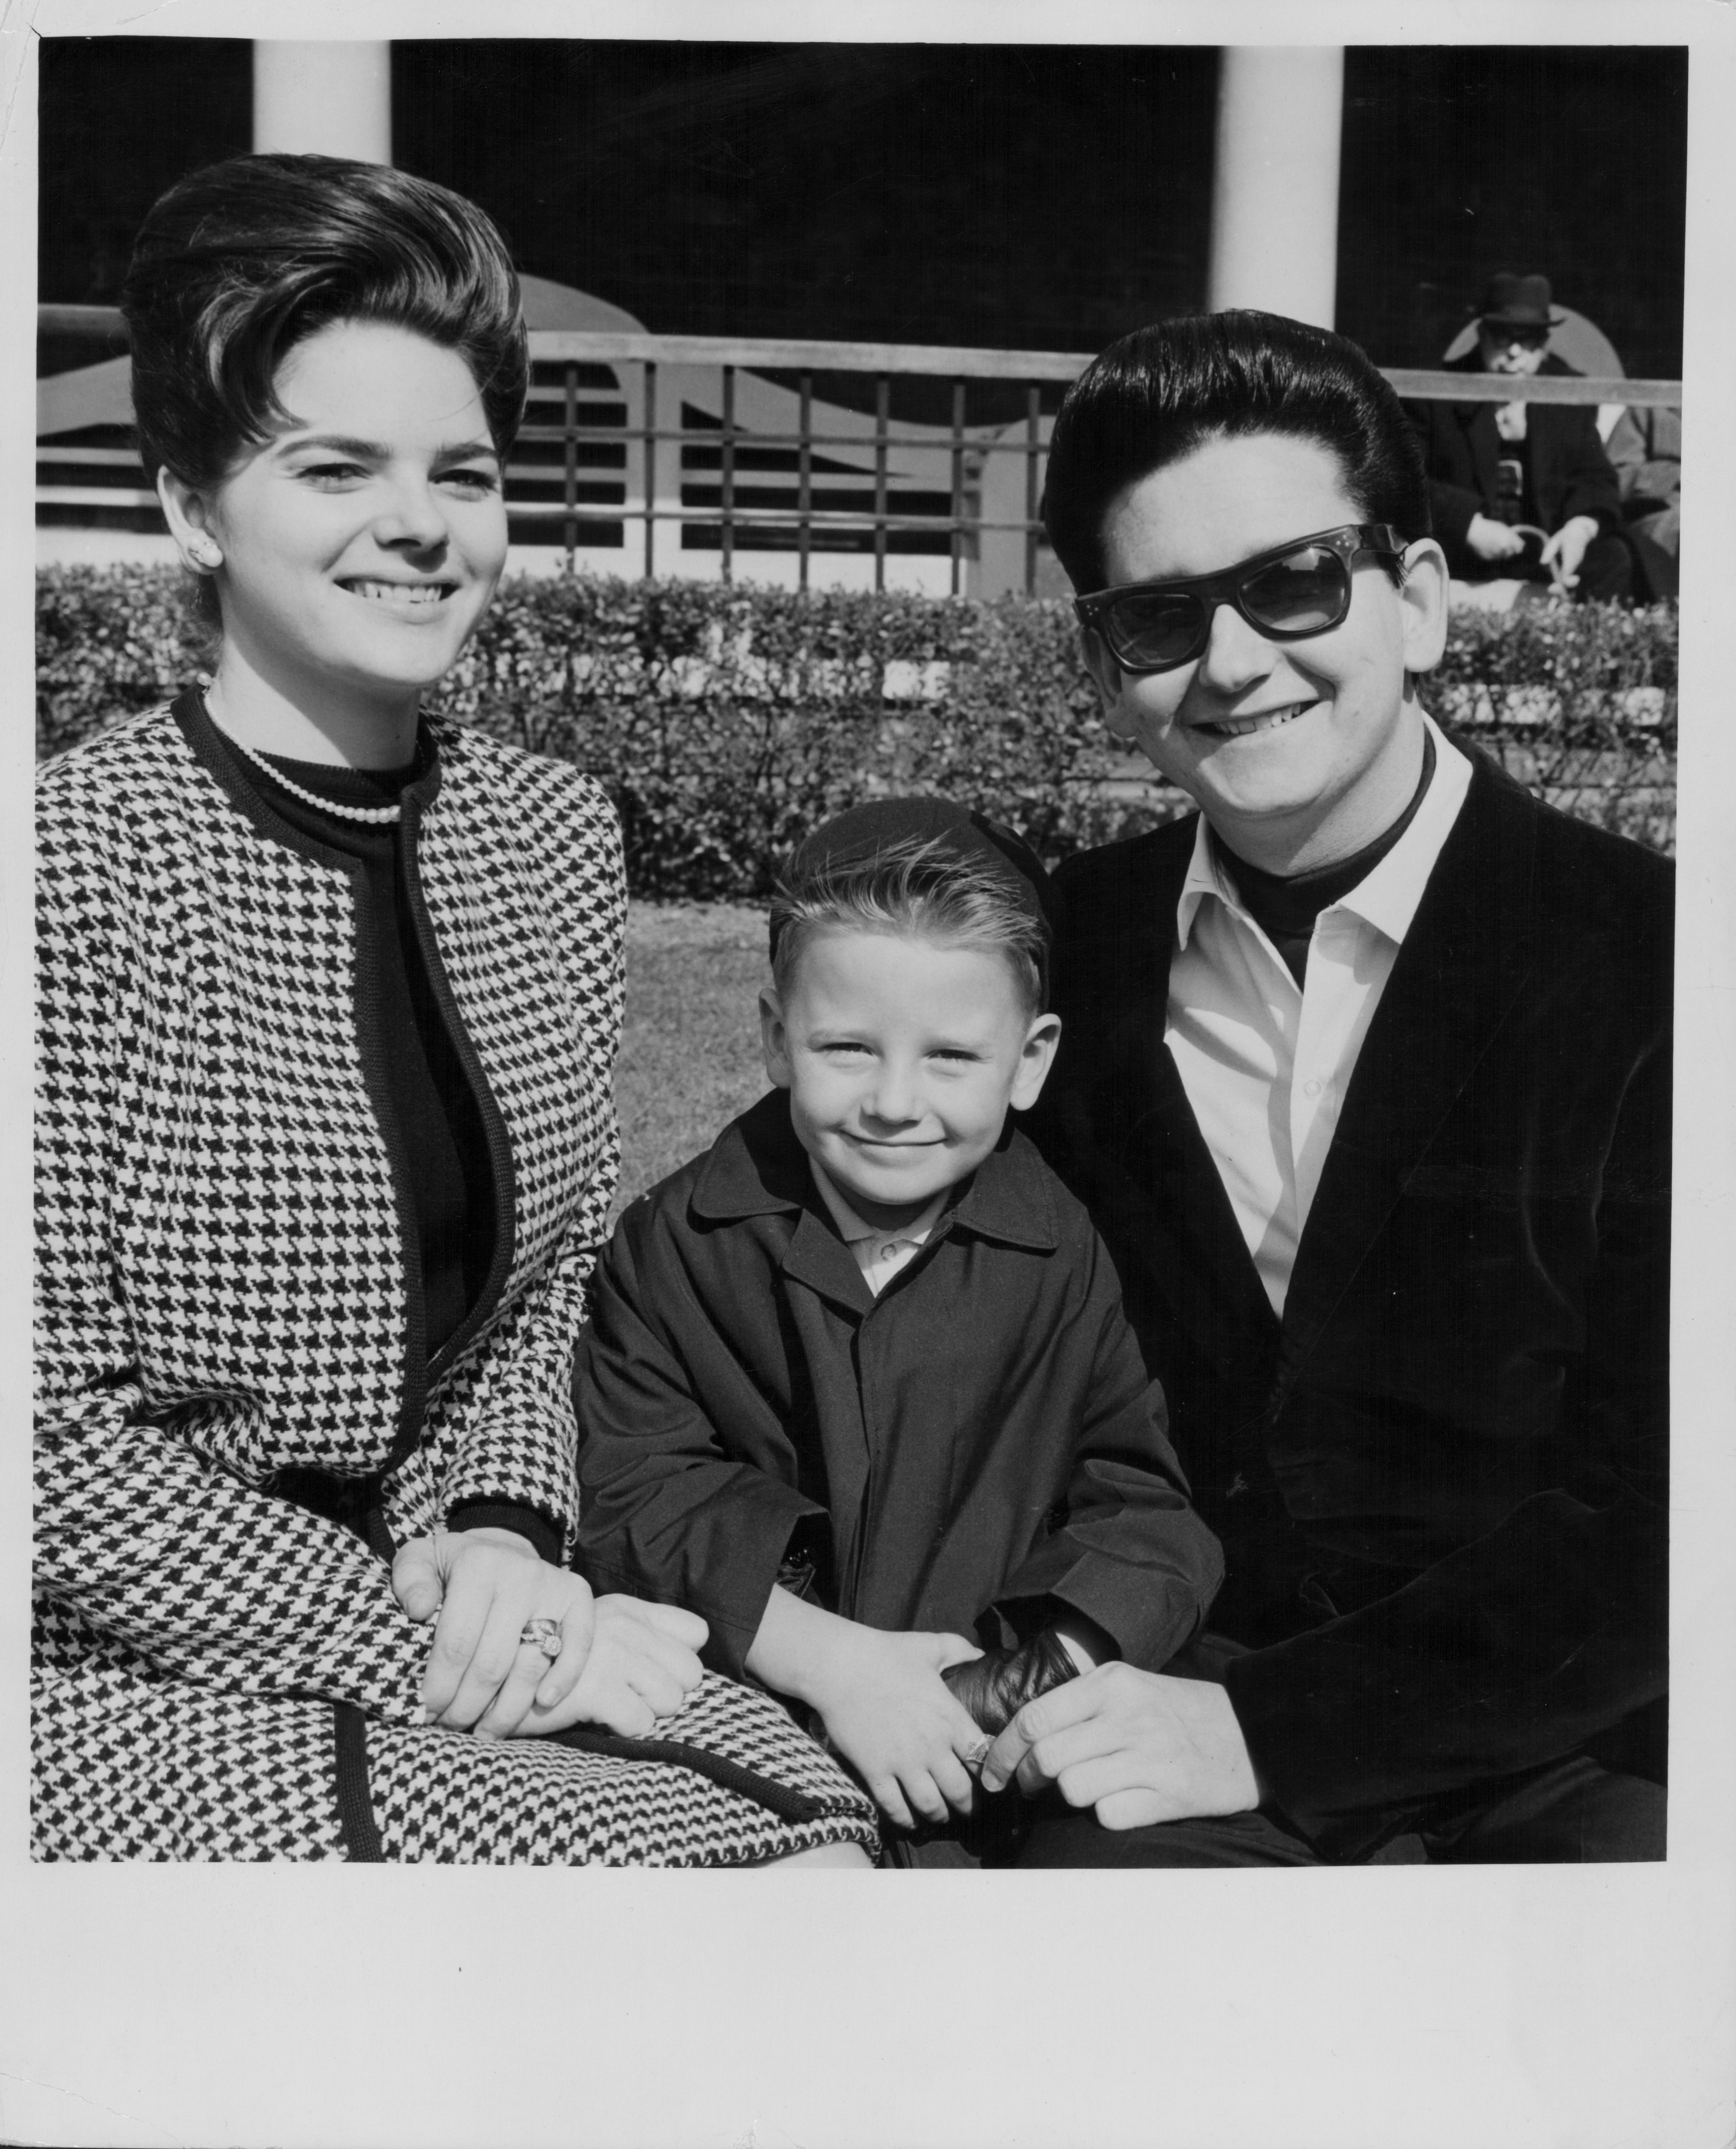 Roy Orbison, with his wife Claudette and son Roy Jr., in the gardens at Dolphin Square, London, April 9th 1964. | Source: GettyImages 